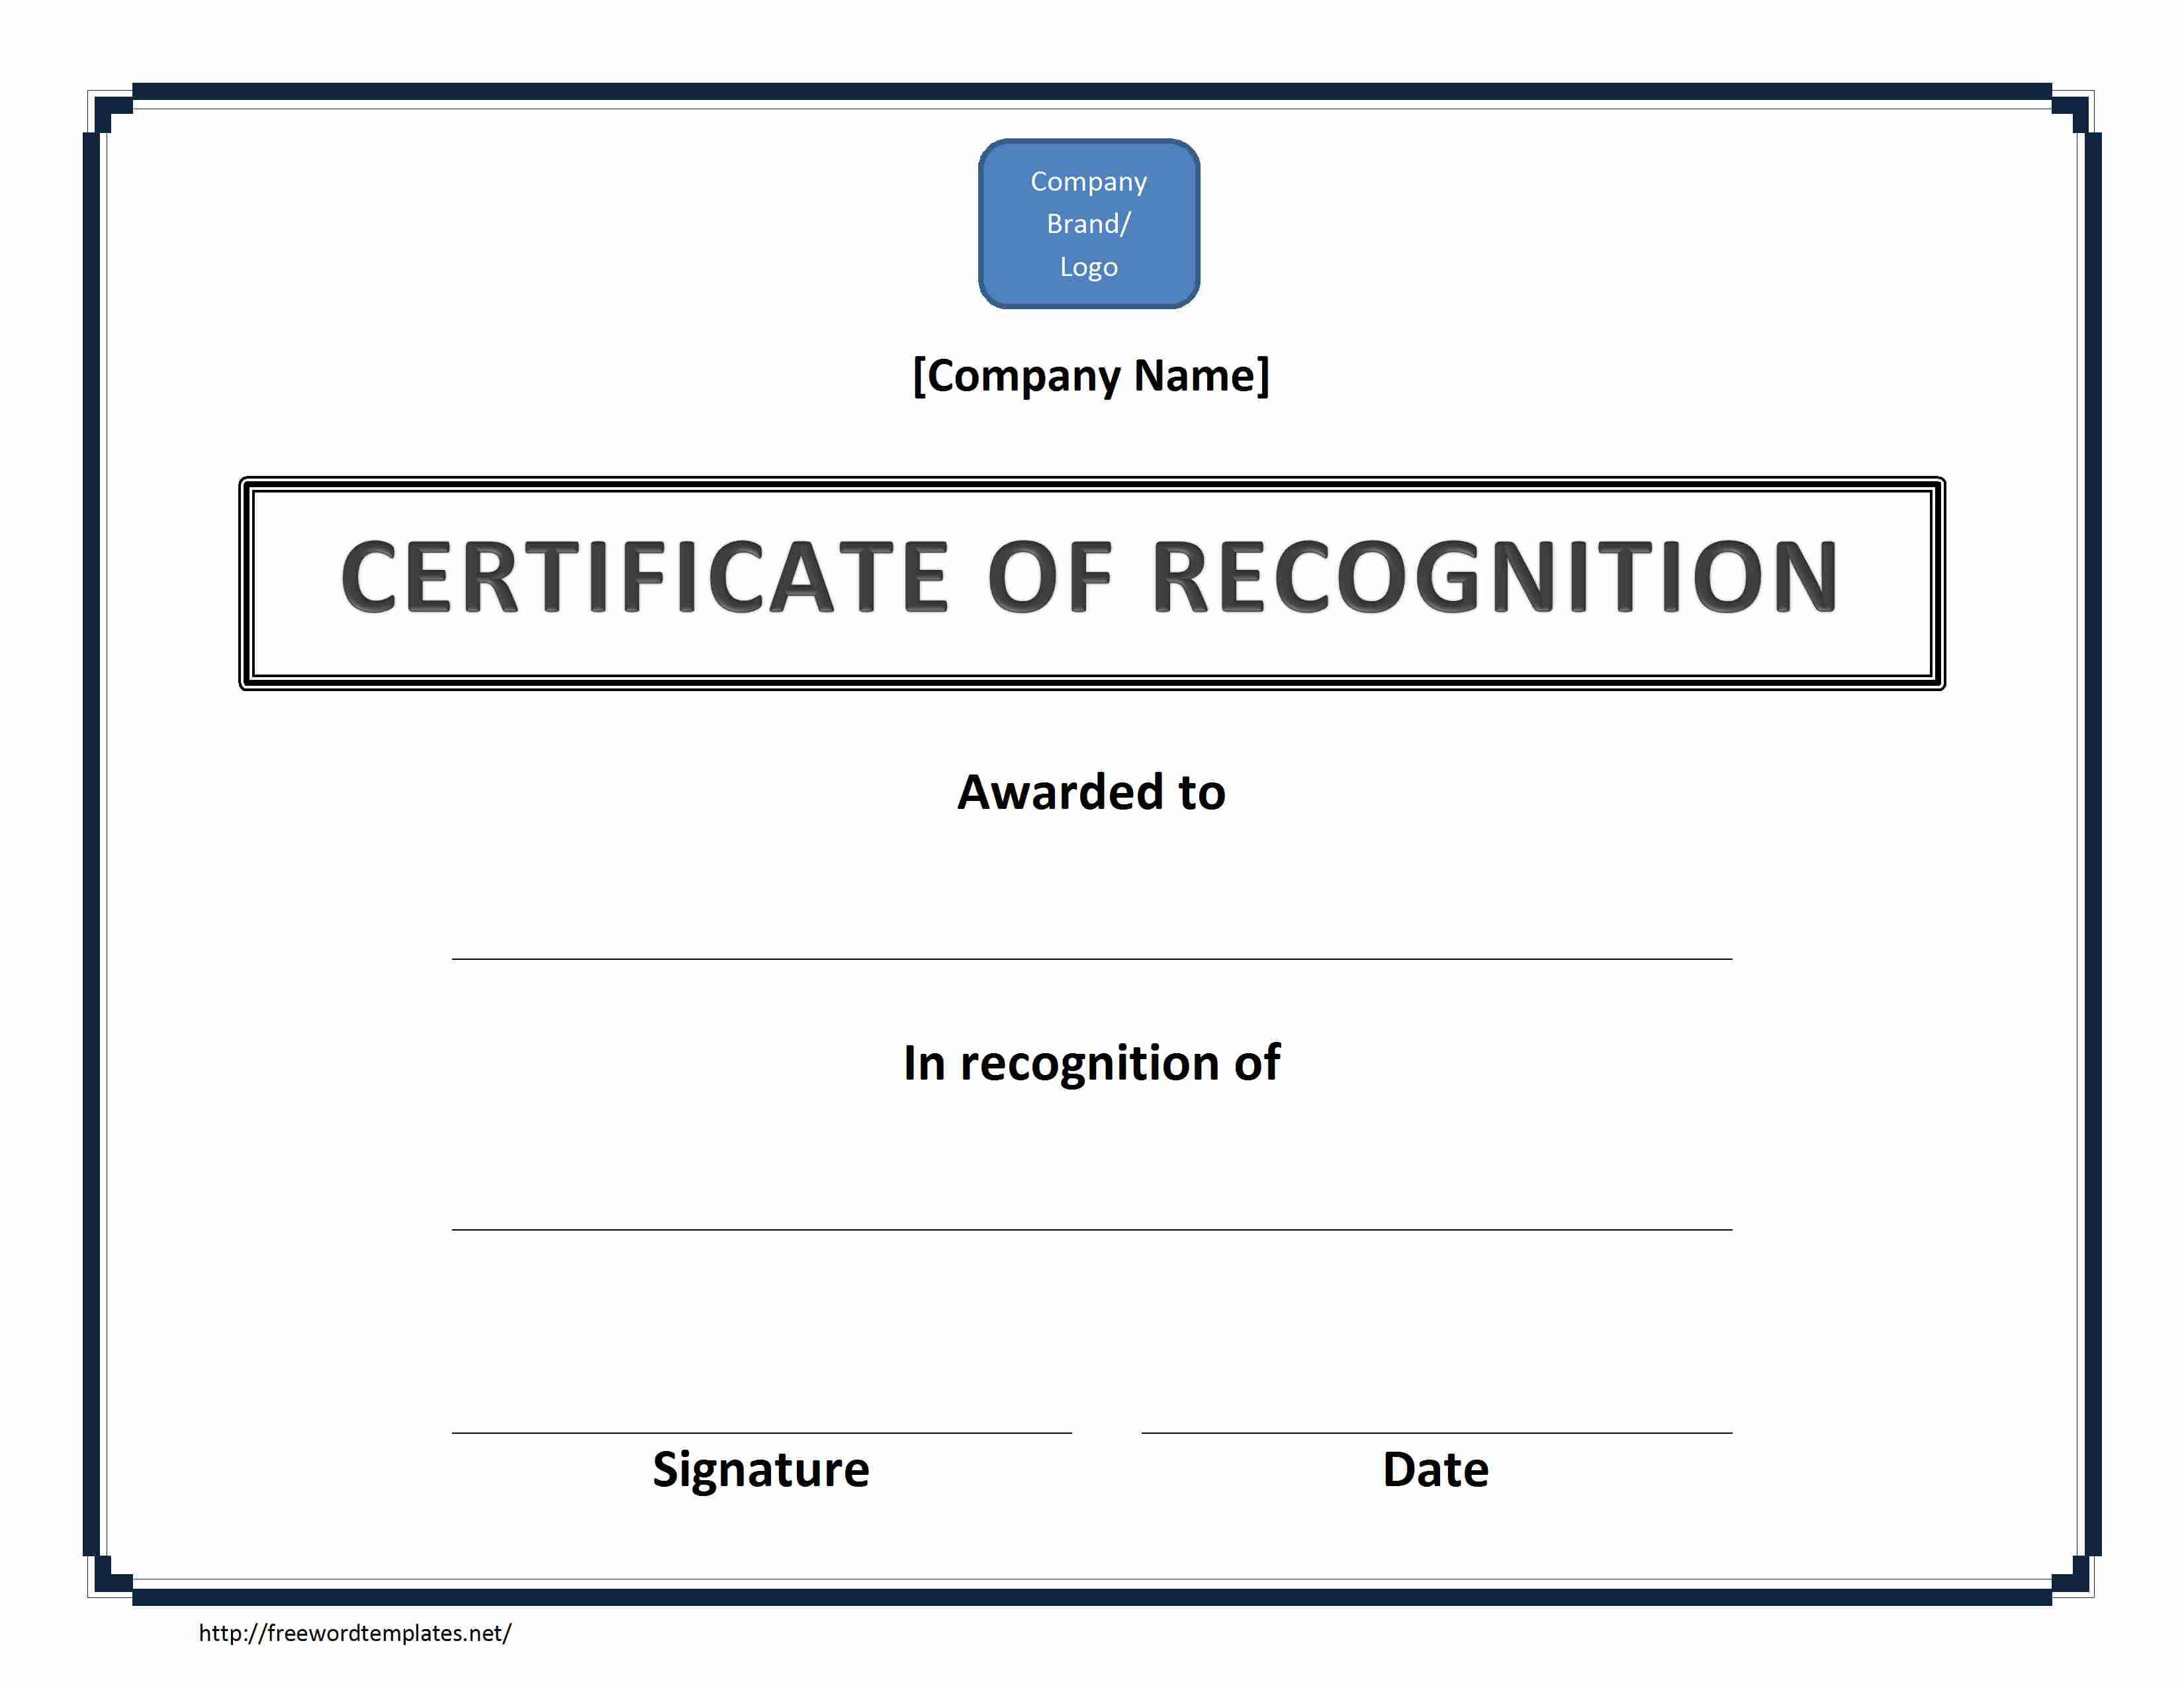 Certificate Of Recognition For Word 2013 Certificate Template